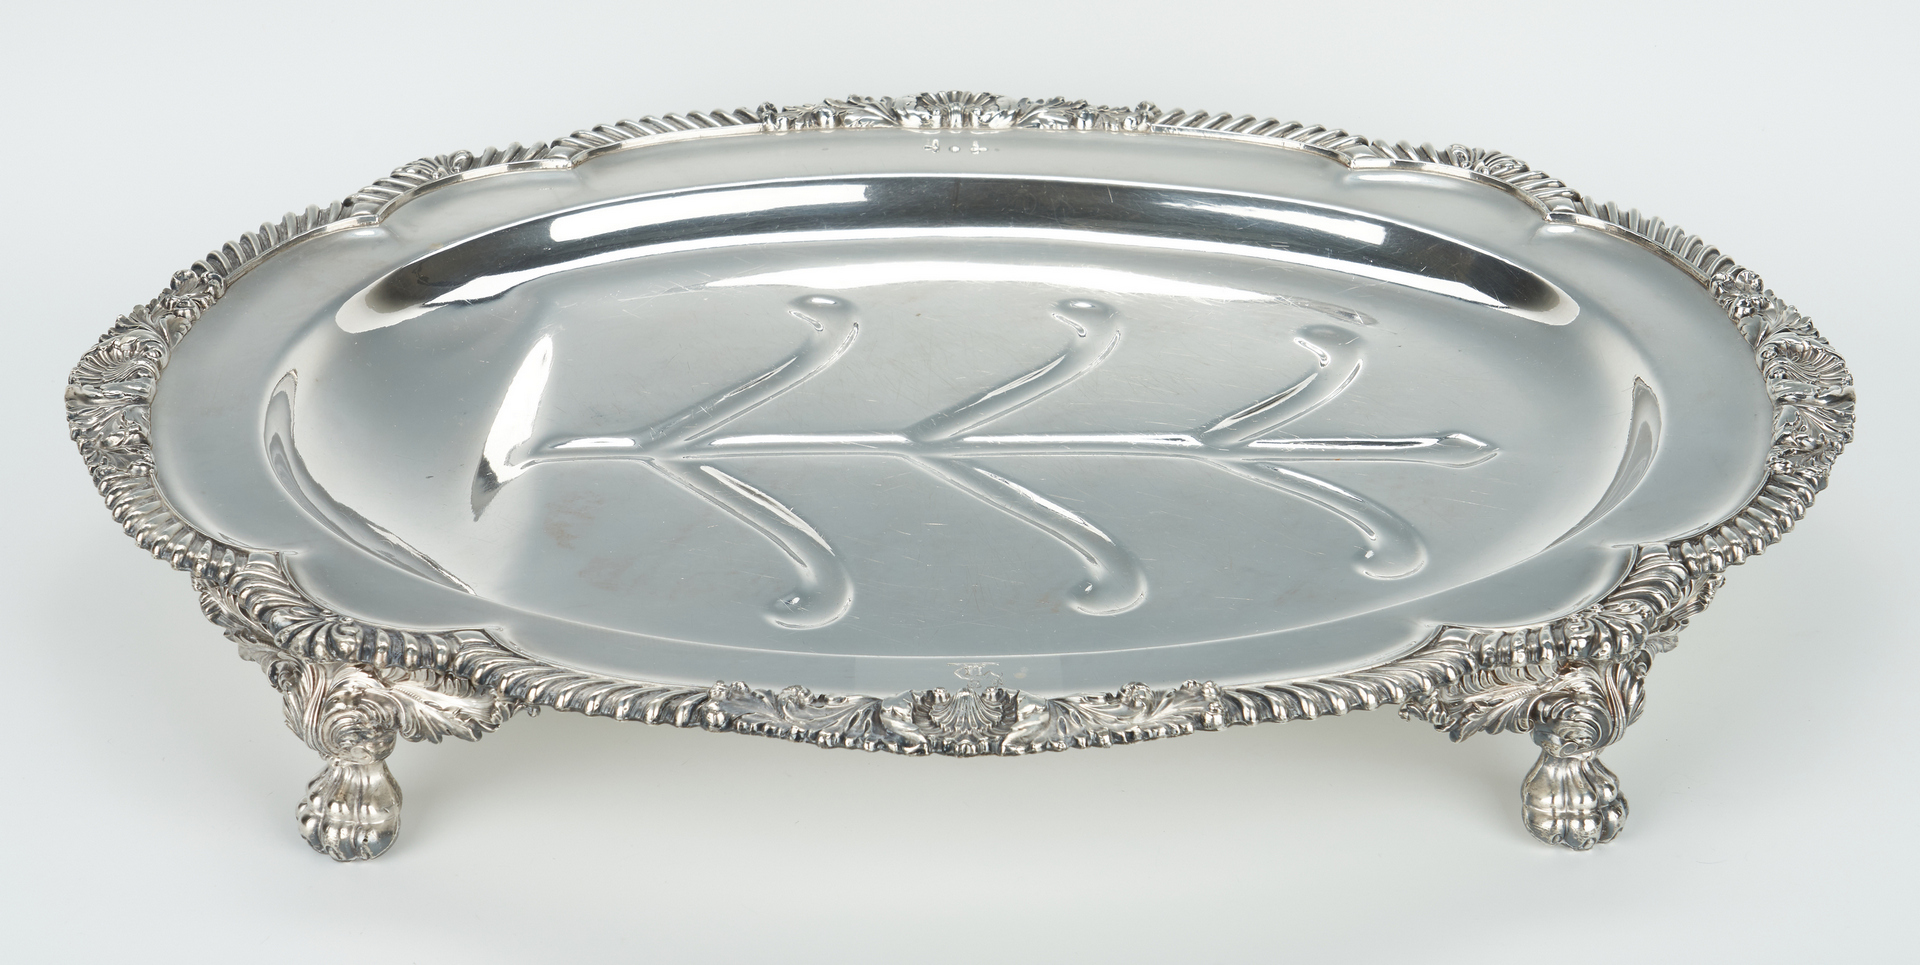 Lot 93: Old Sheffield Crested Meat Dome & Platter